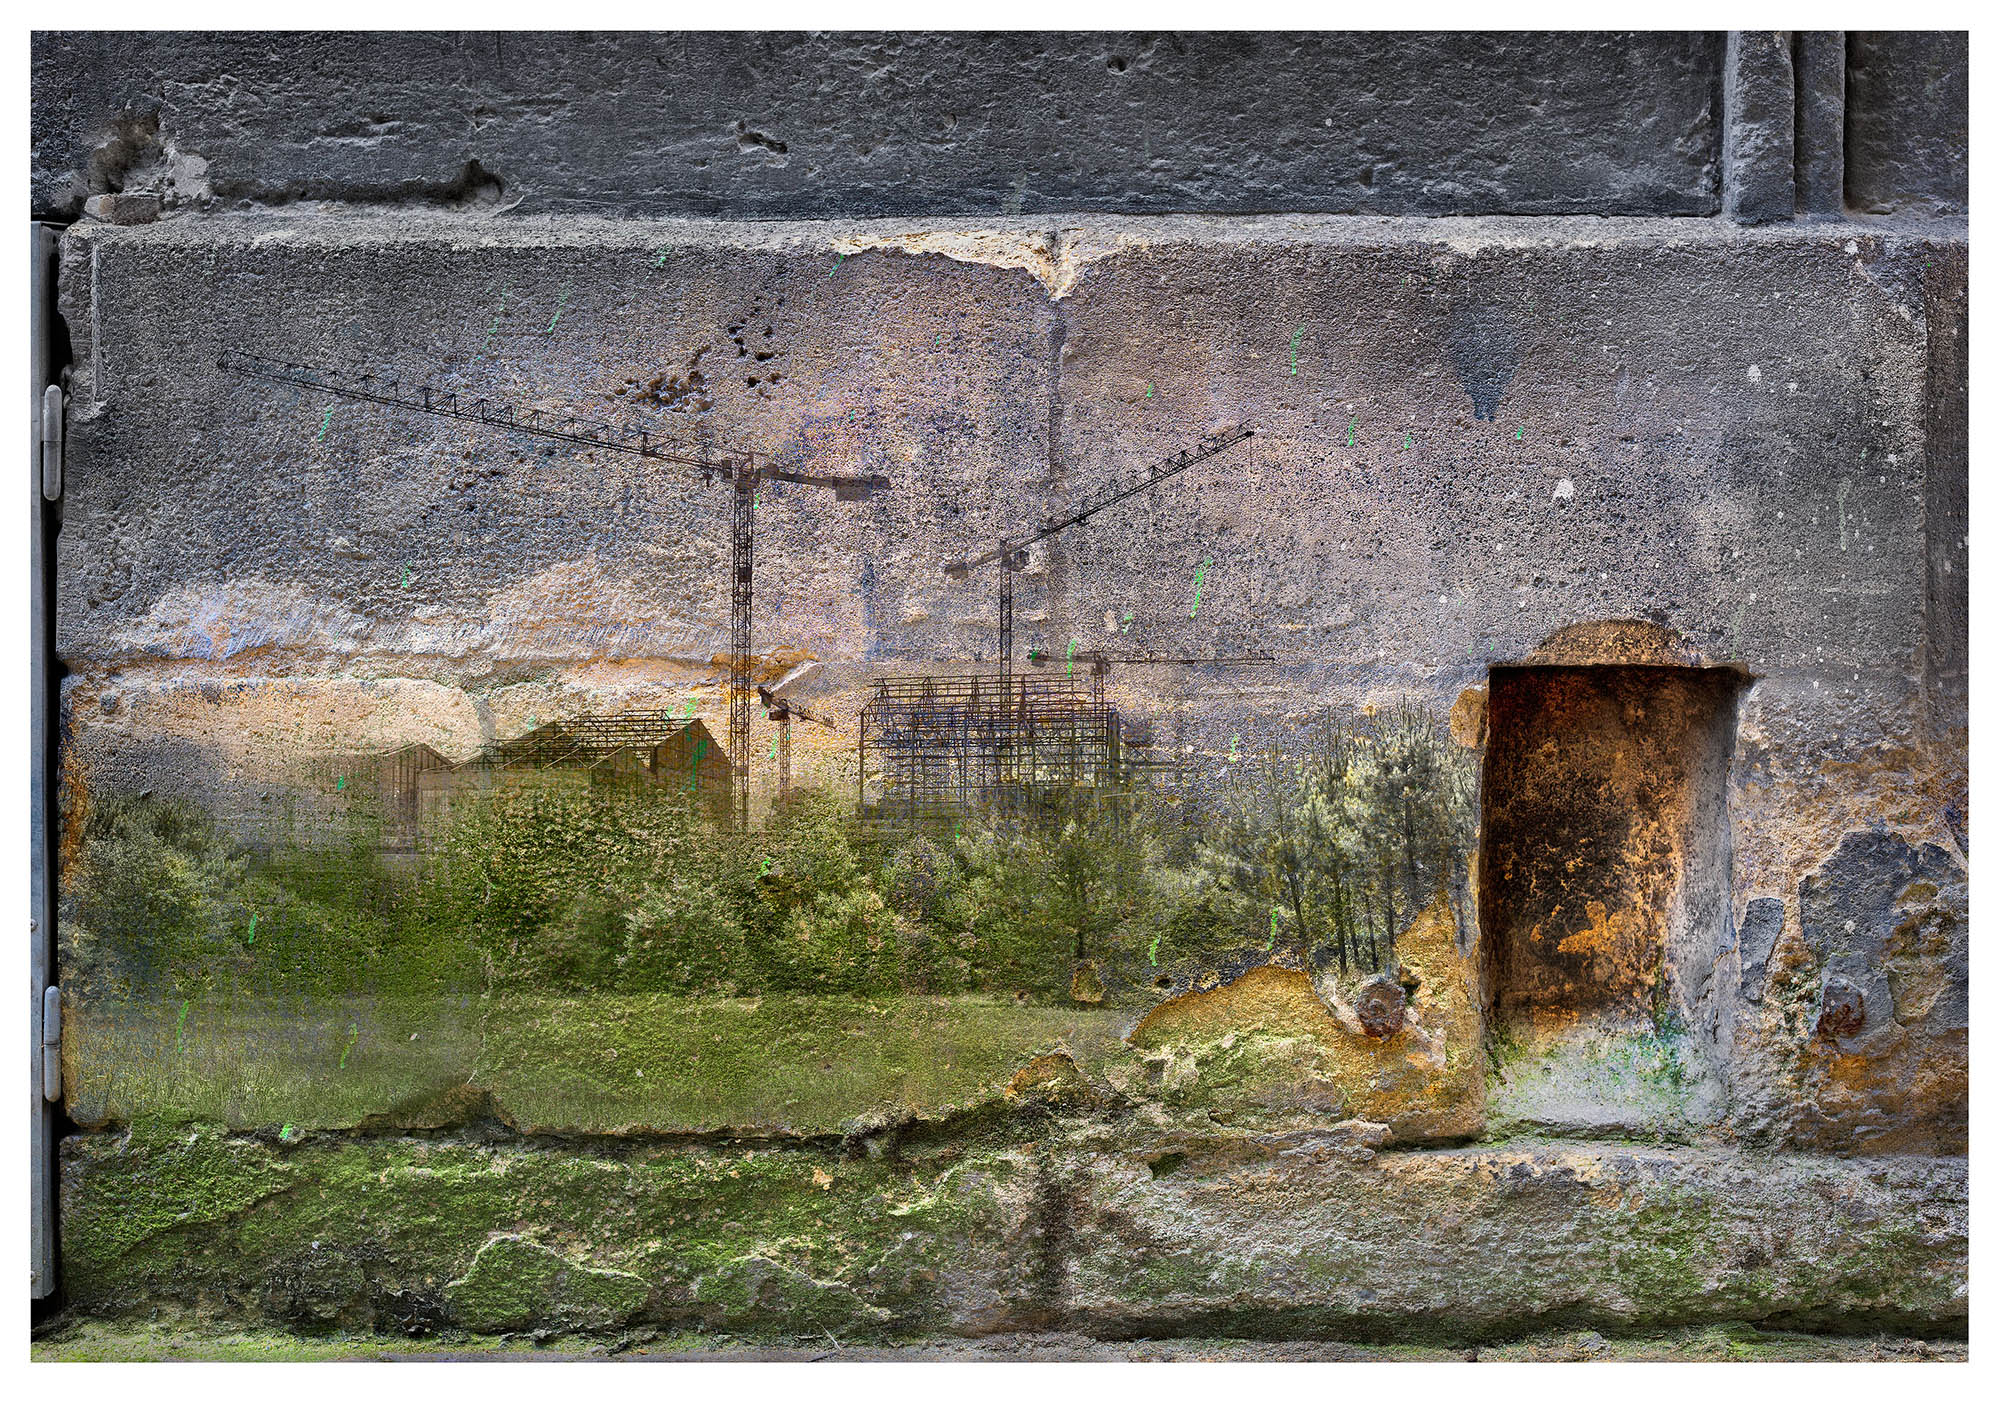 3rd in series: wall texture used to complement overlaid green field and woodland landscape overlay- distant cranes on building site, human encroachment